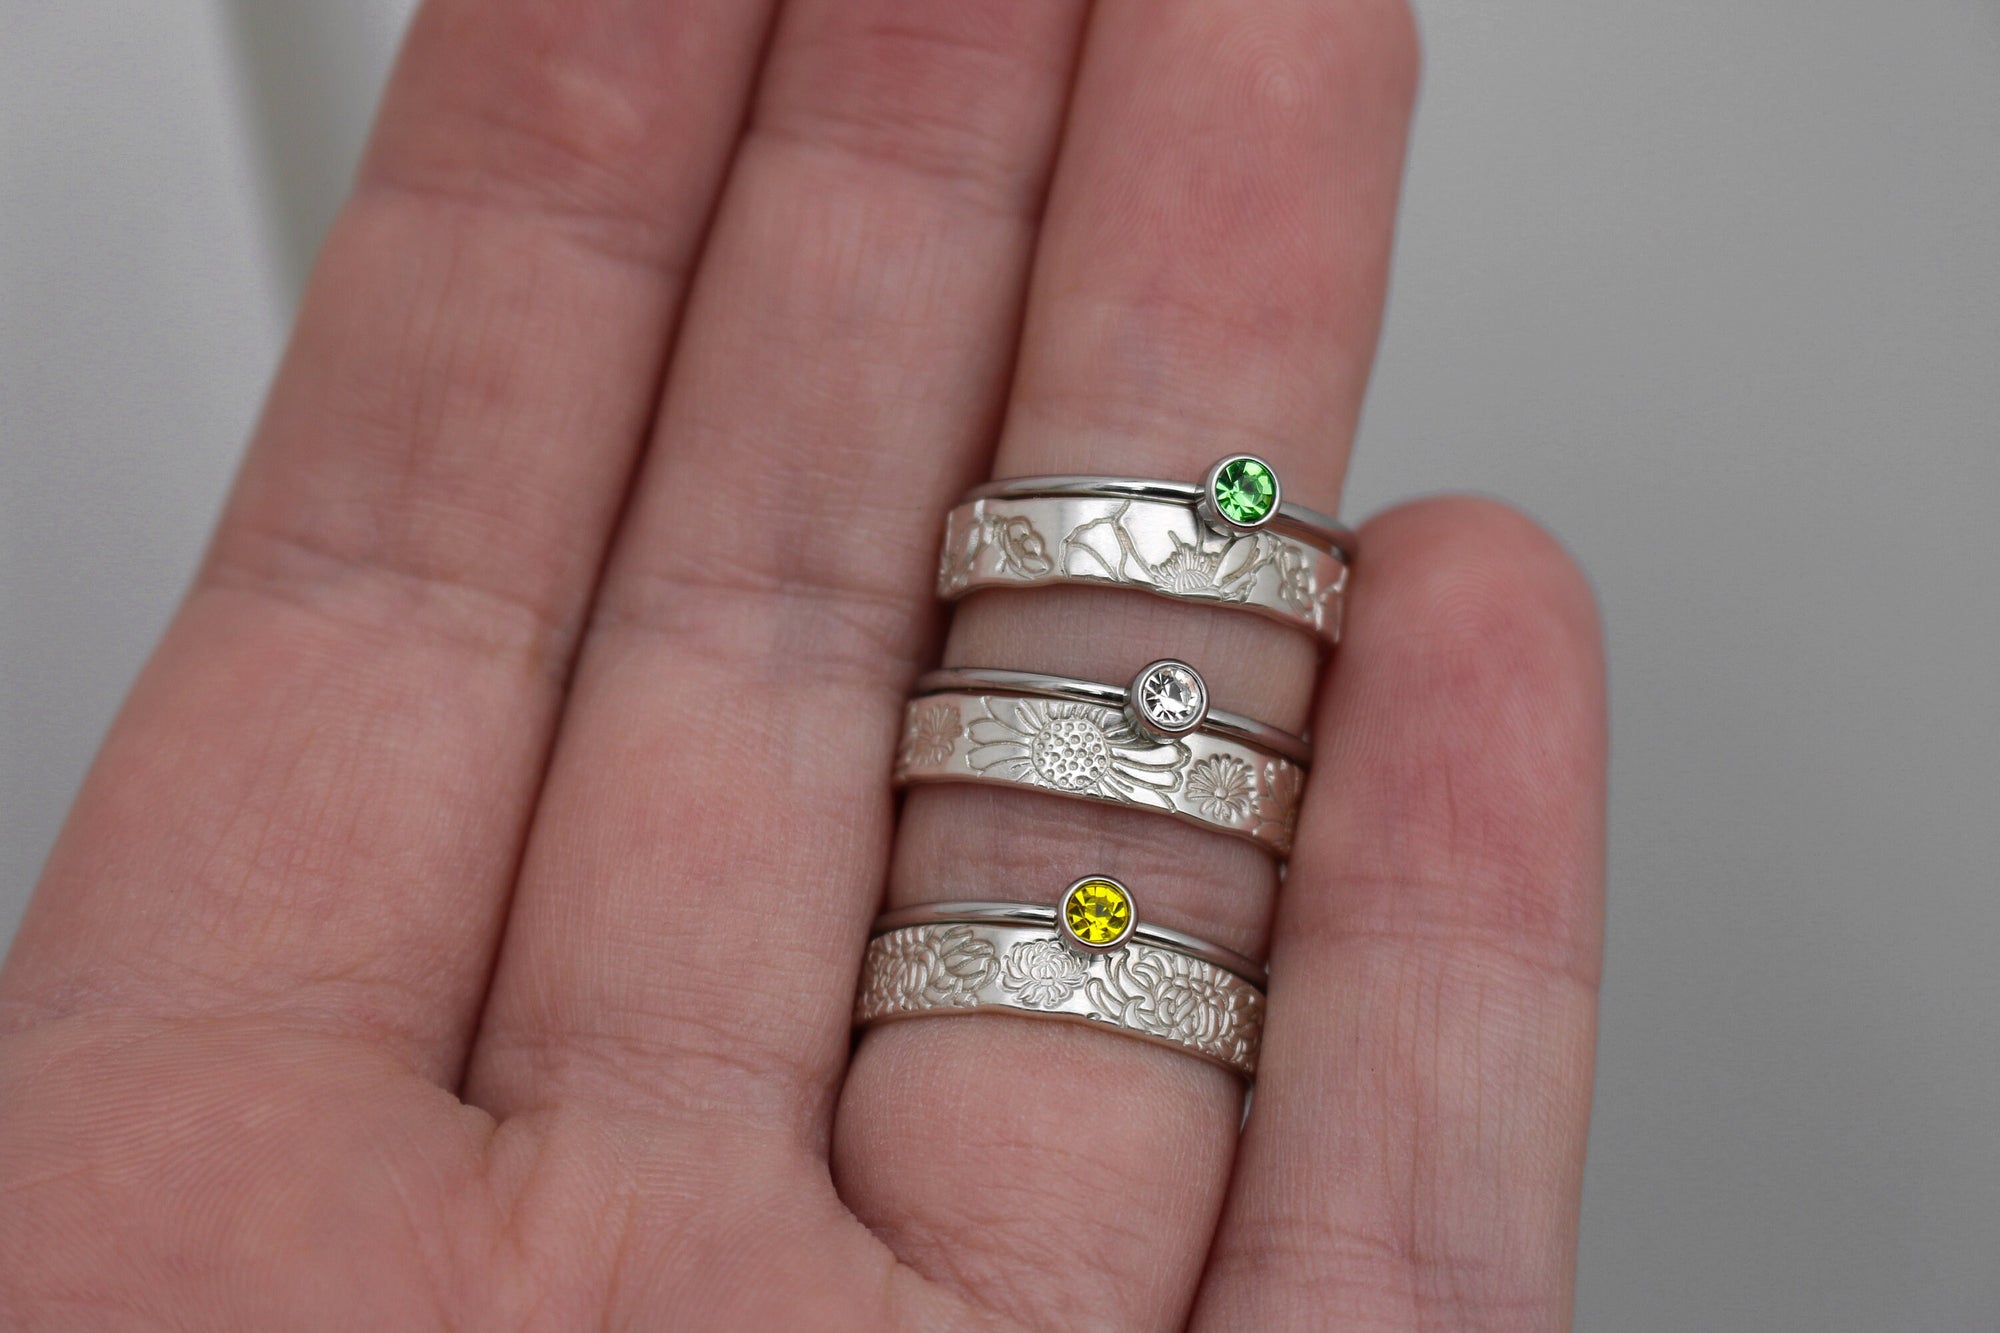 2 Ring Birth Flower and Birthstone Ring Set • Gemstone Ring in Stainless Steel • Dainty Birthstone Ring • Stacking Ring • Gifts for Mom